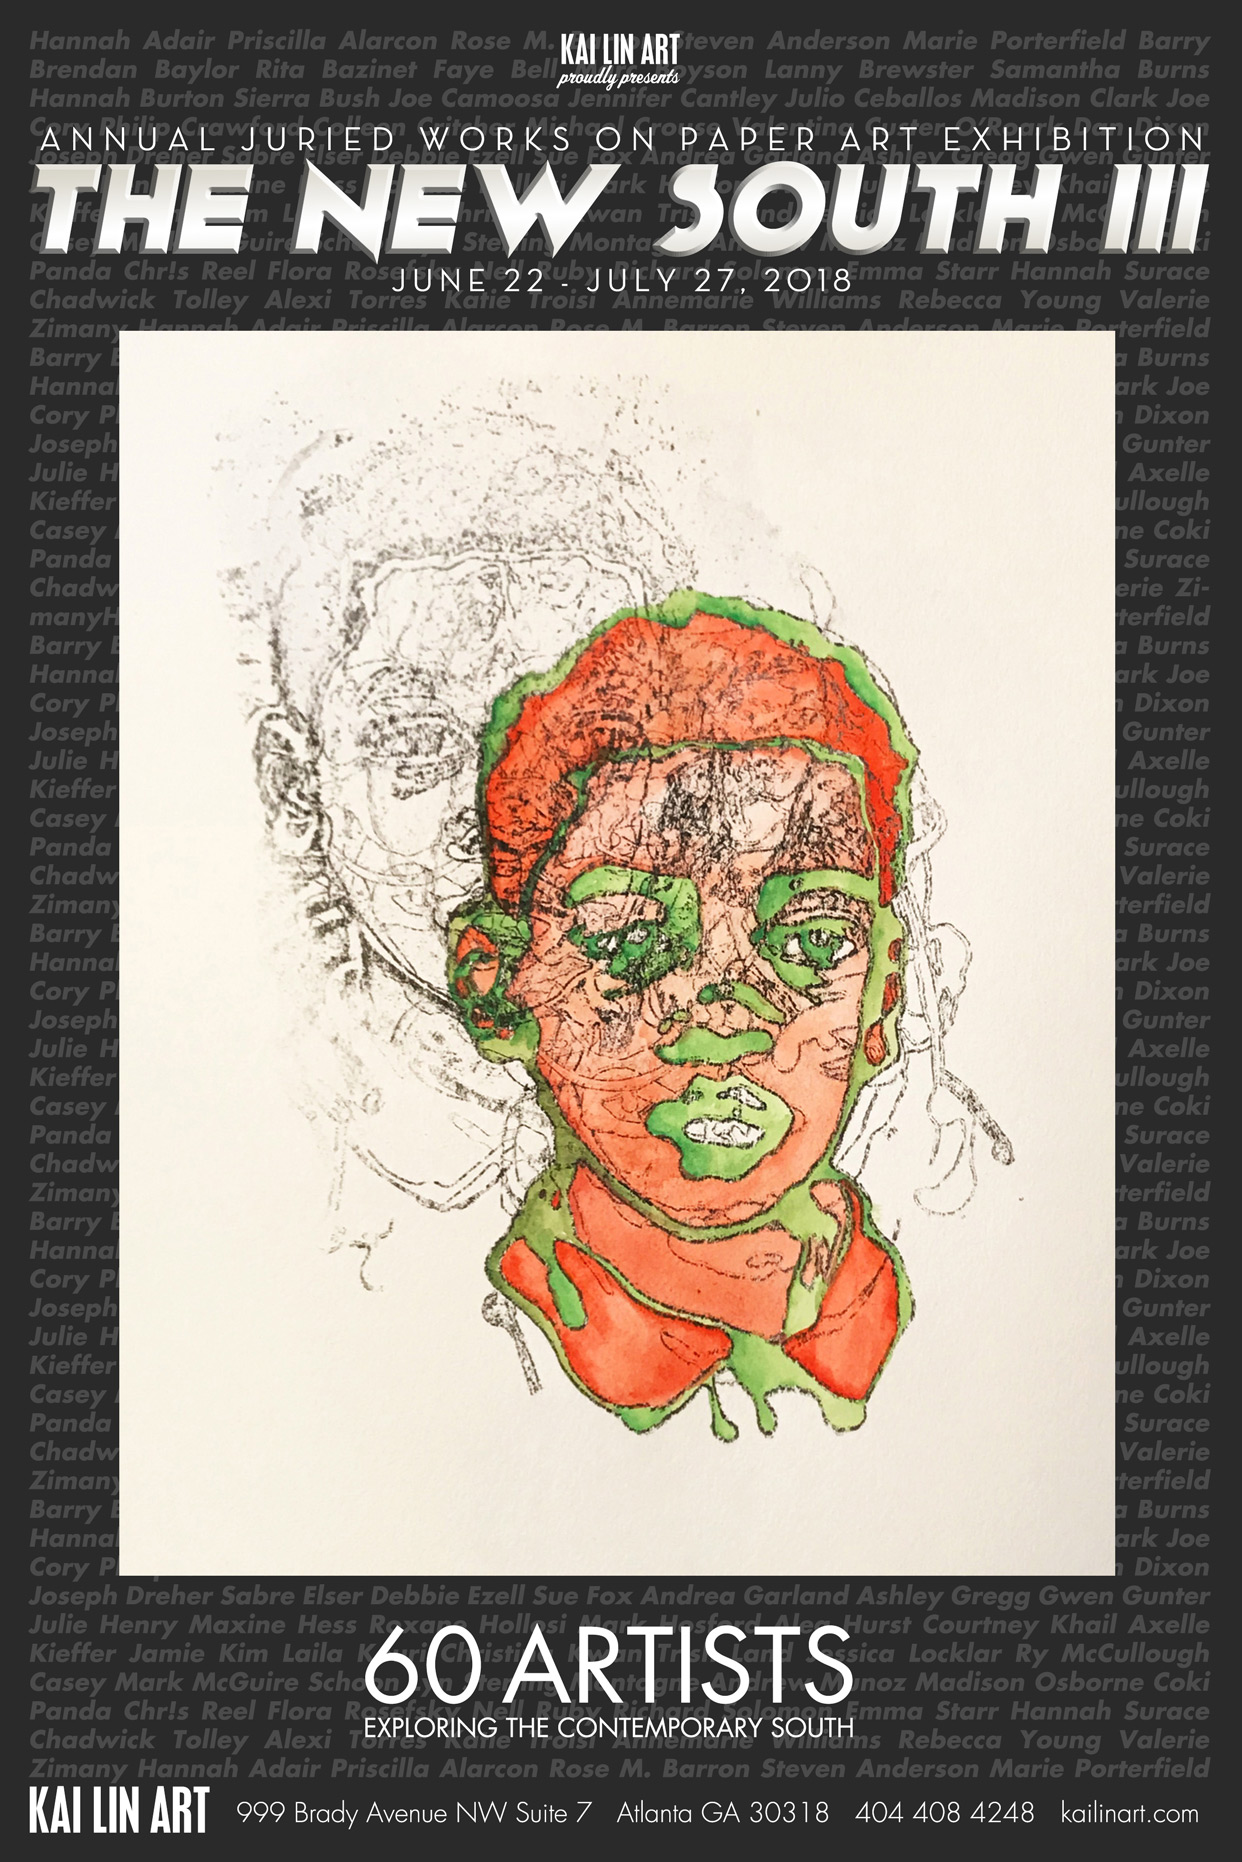 Dreher_Joe_Puer-Rufus-et-Viridis-(The-Boy-Red-and-Green)_Carbon-Transfer-and-Watercolor-on-Paper_11-x-14.jpg